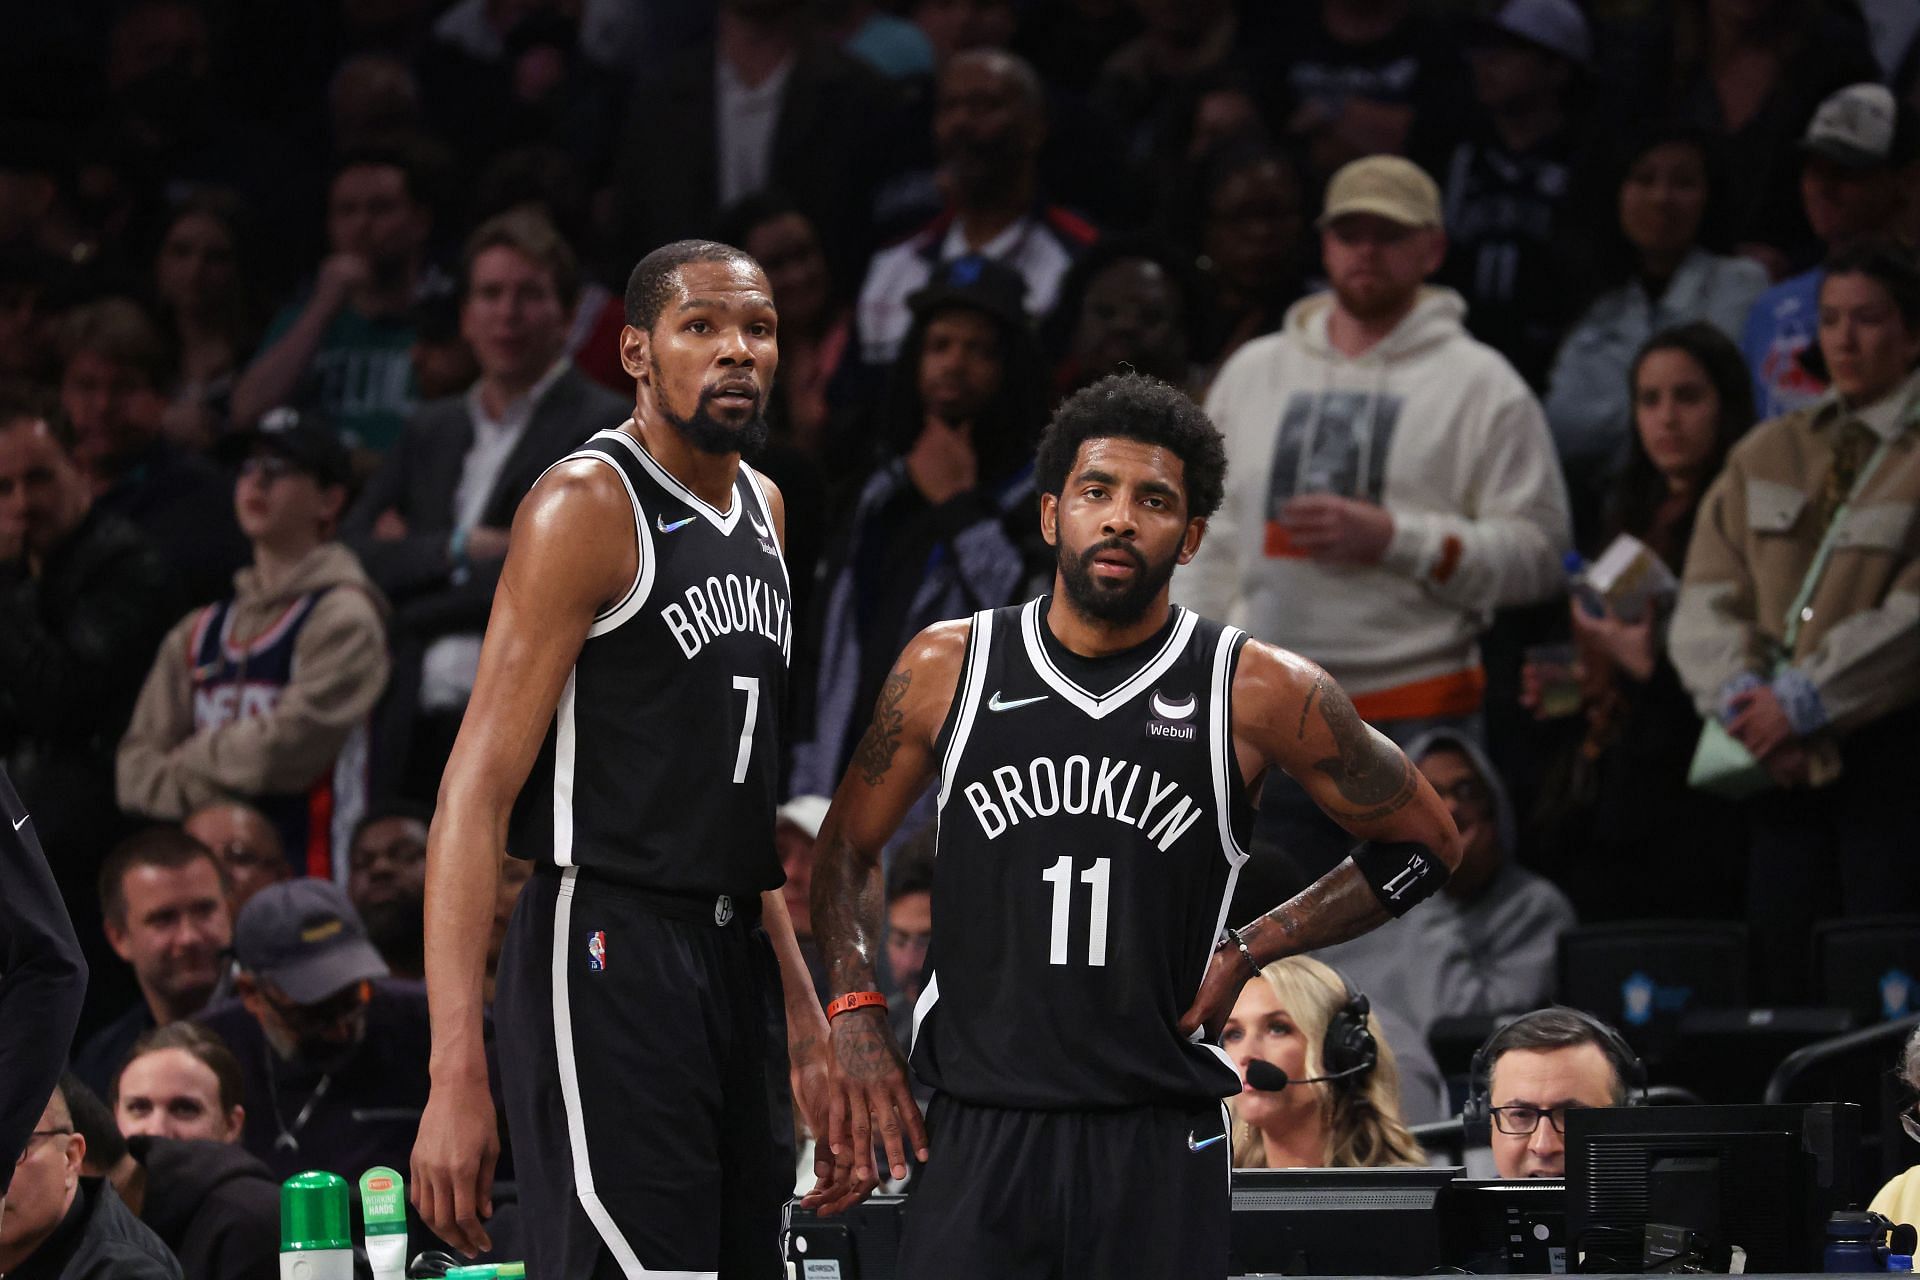 Kevin Durant #7 and Kyrie Irving #11 of the Brooklyn Nets look on in the final seconds of their 109-103 loss against the Boston Celtics during Game Three of the Eastern Conference First Round NBA Playoffs at Barclays Center on April 23, 2022 in New York City.